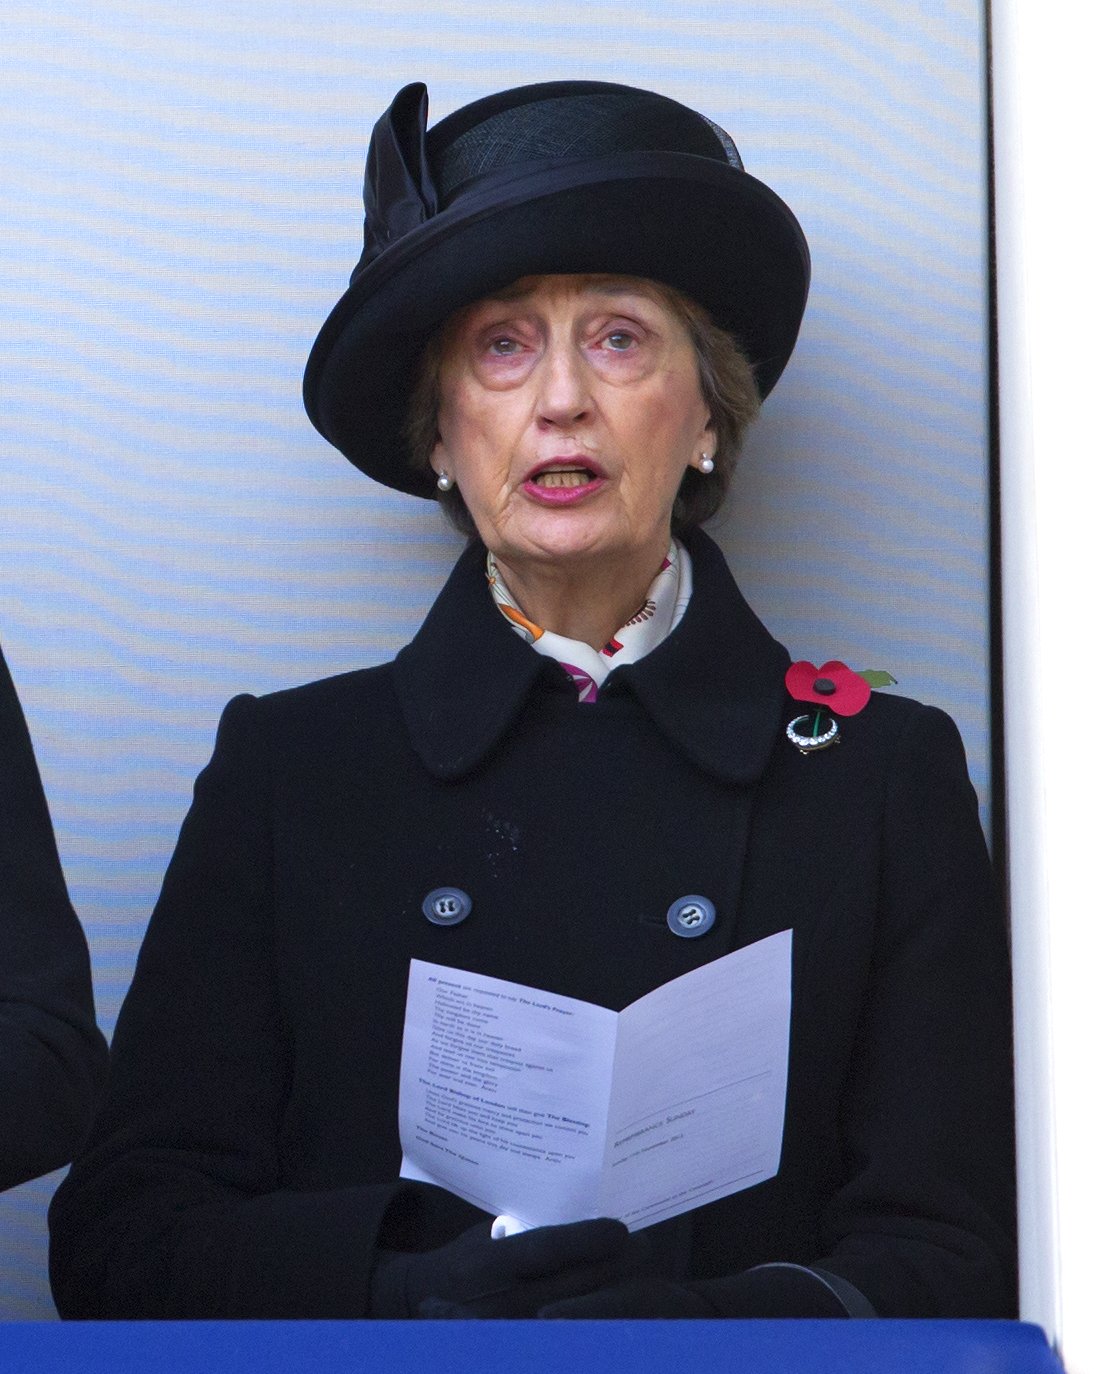 Lady Susan Hussey attends the annual Remembrance Sunday Service at the Cenotaph, Whitehall on November 11, 2012 in London, England | Photo: Getty Images